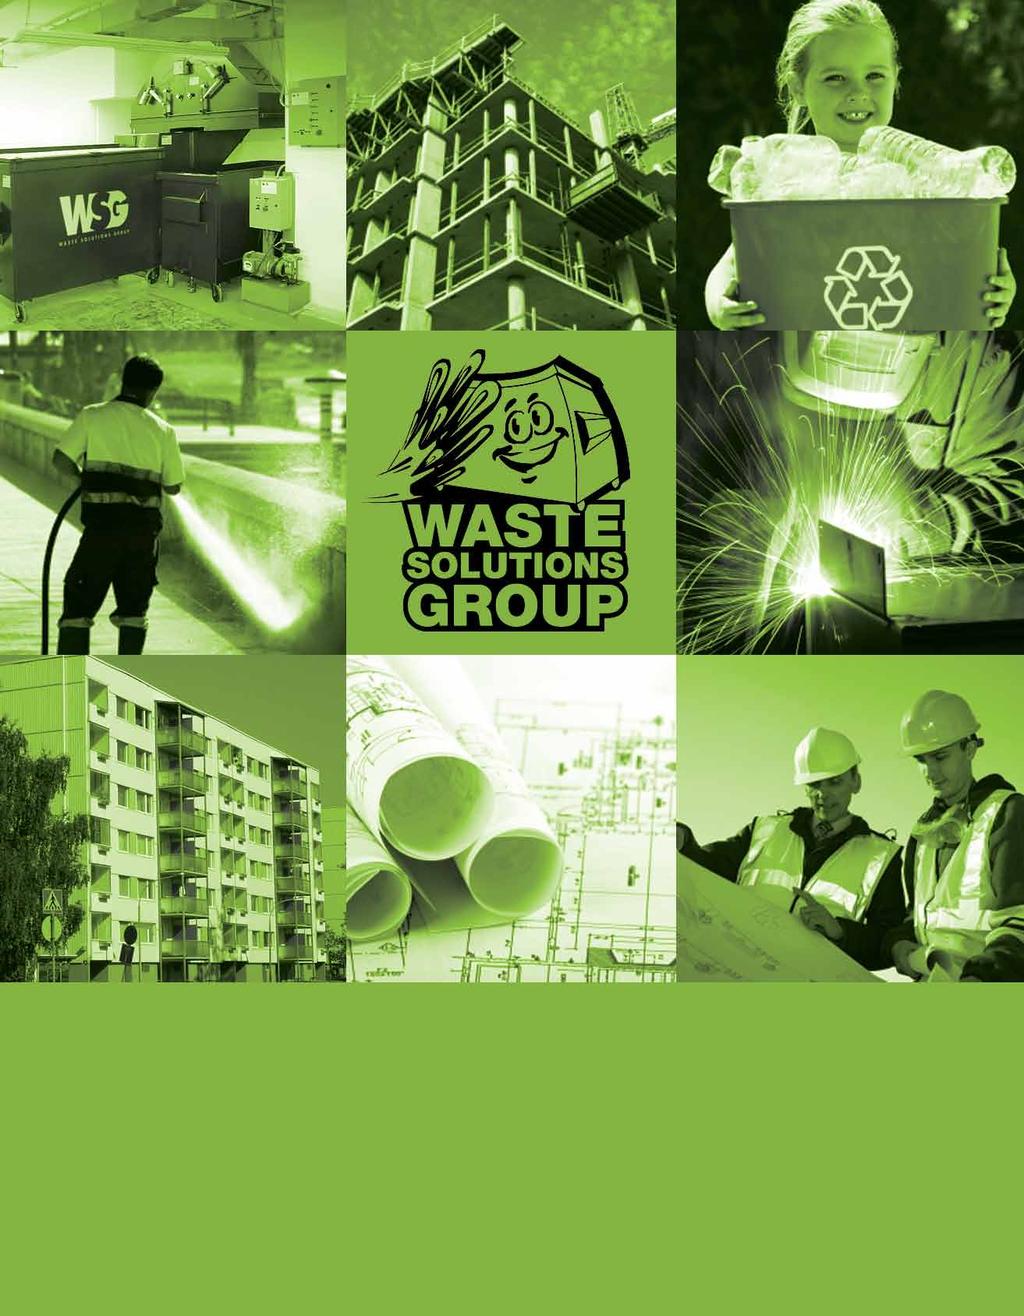 WASTE SOLUTIONS GROUP LET US HELP YOU GET YOUR CHUTE